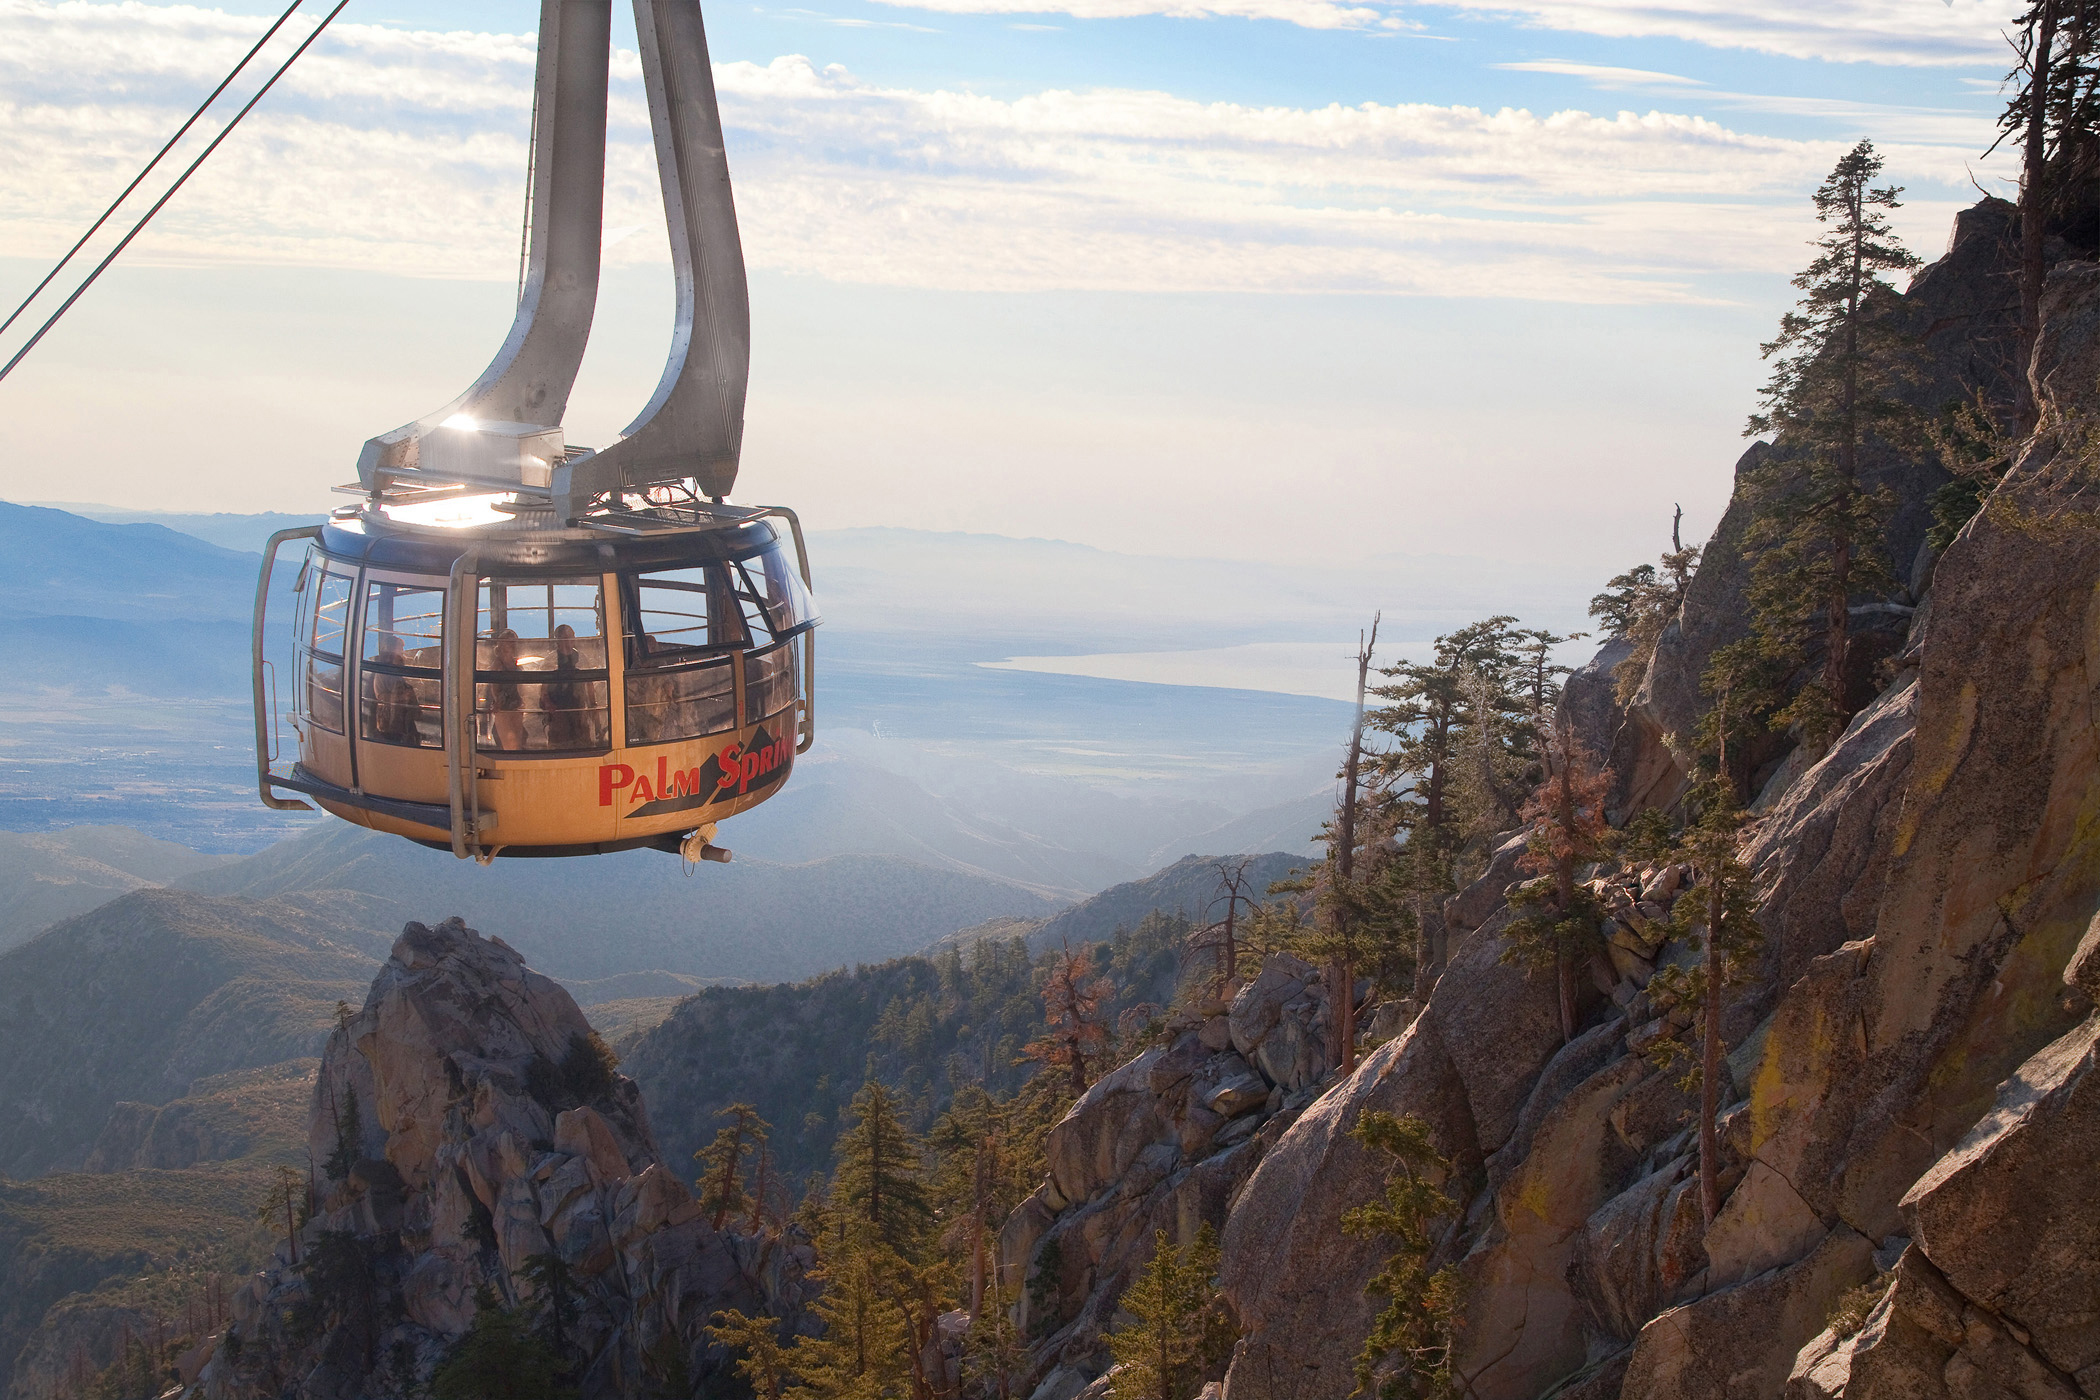 Palm Springs Aerial Tramway · VENUES UNLIMITED